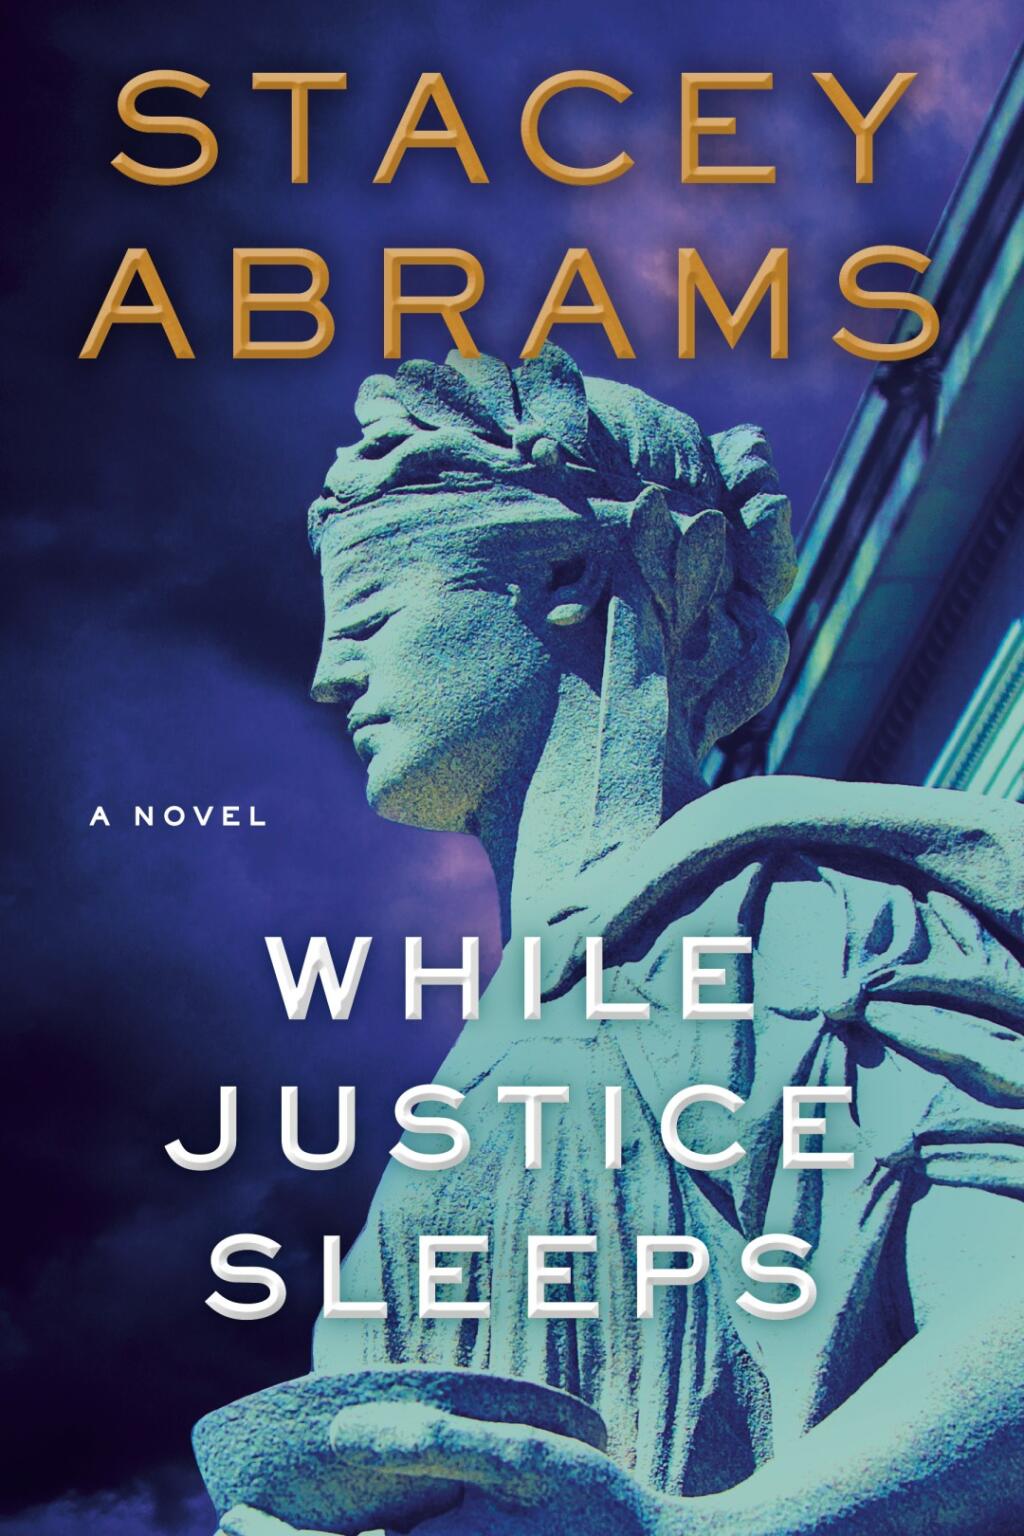 “Justice Never Sleeps,” by Stacey Abrams, is the No. 1 bestselling book in Petaluma this week. (DOUBLEDAY)